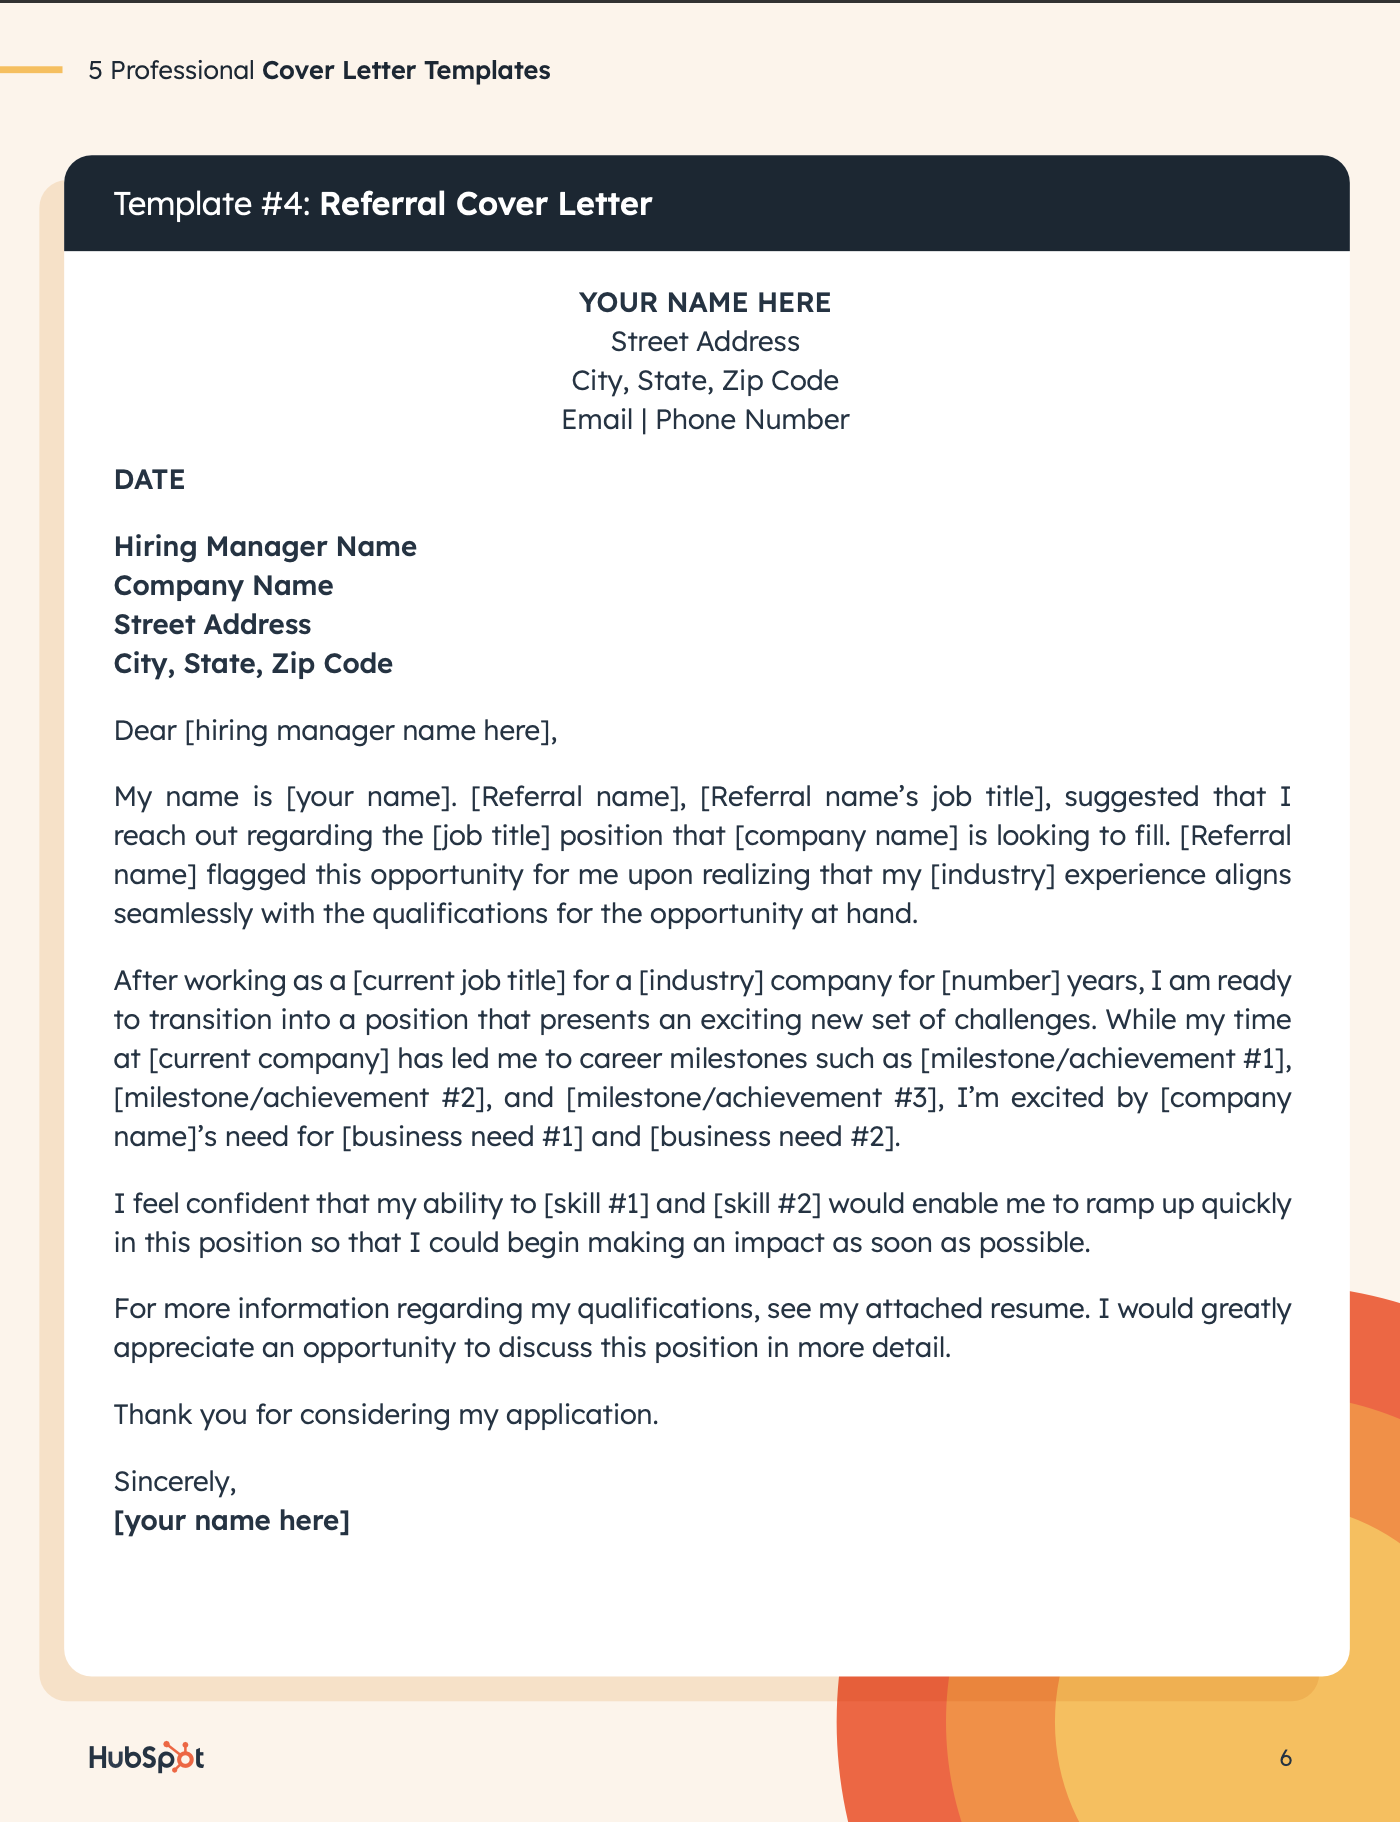 Cover Letter Templates - 3